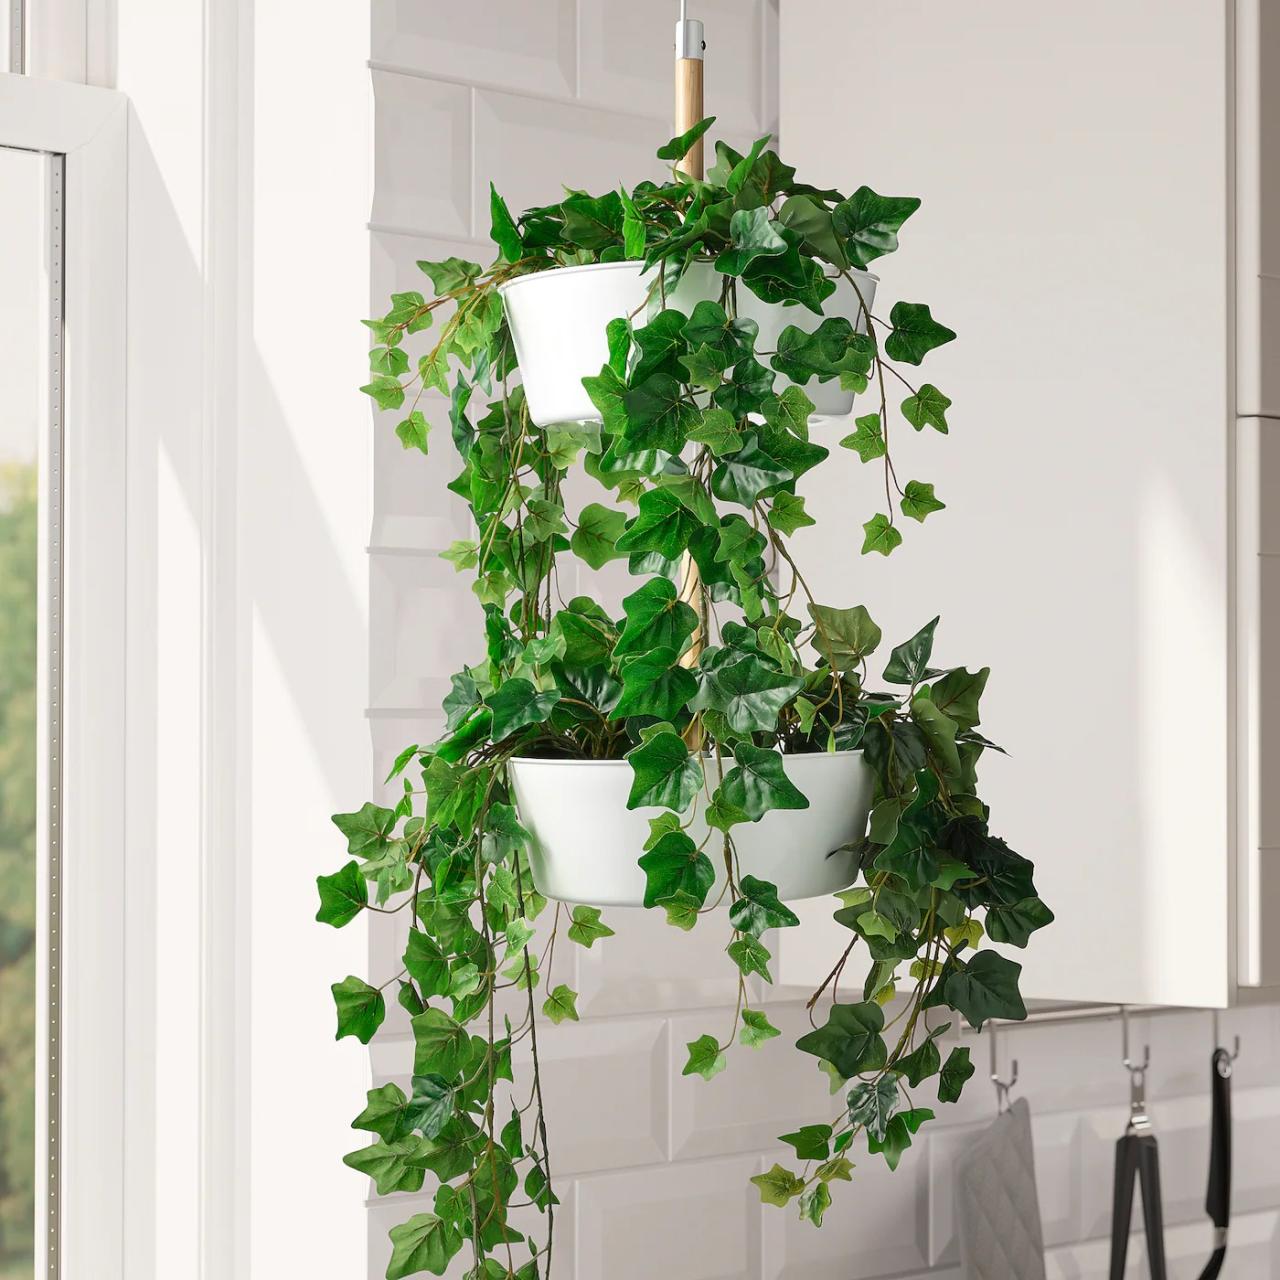 Hanging Plants Indoor | Hanging Ivy Plants: Indoor Greenery with Air-Purifying Benefits